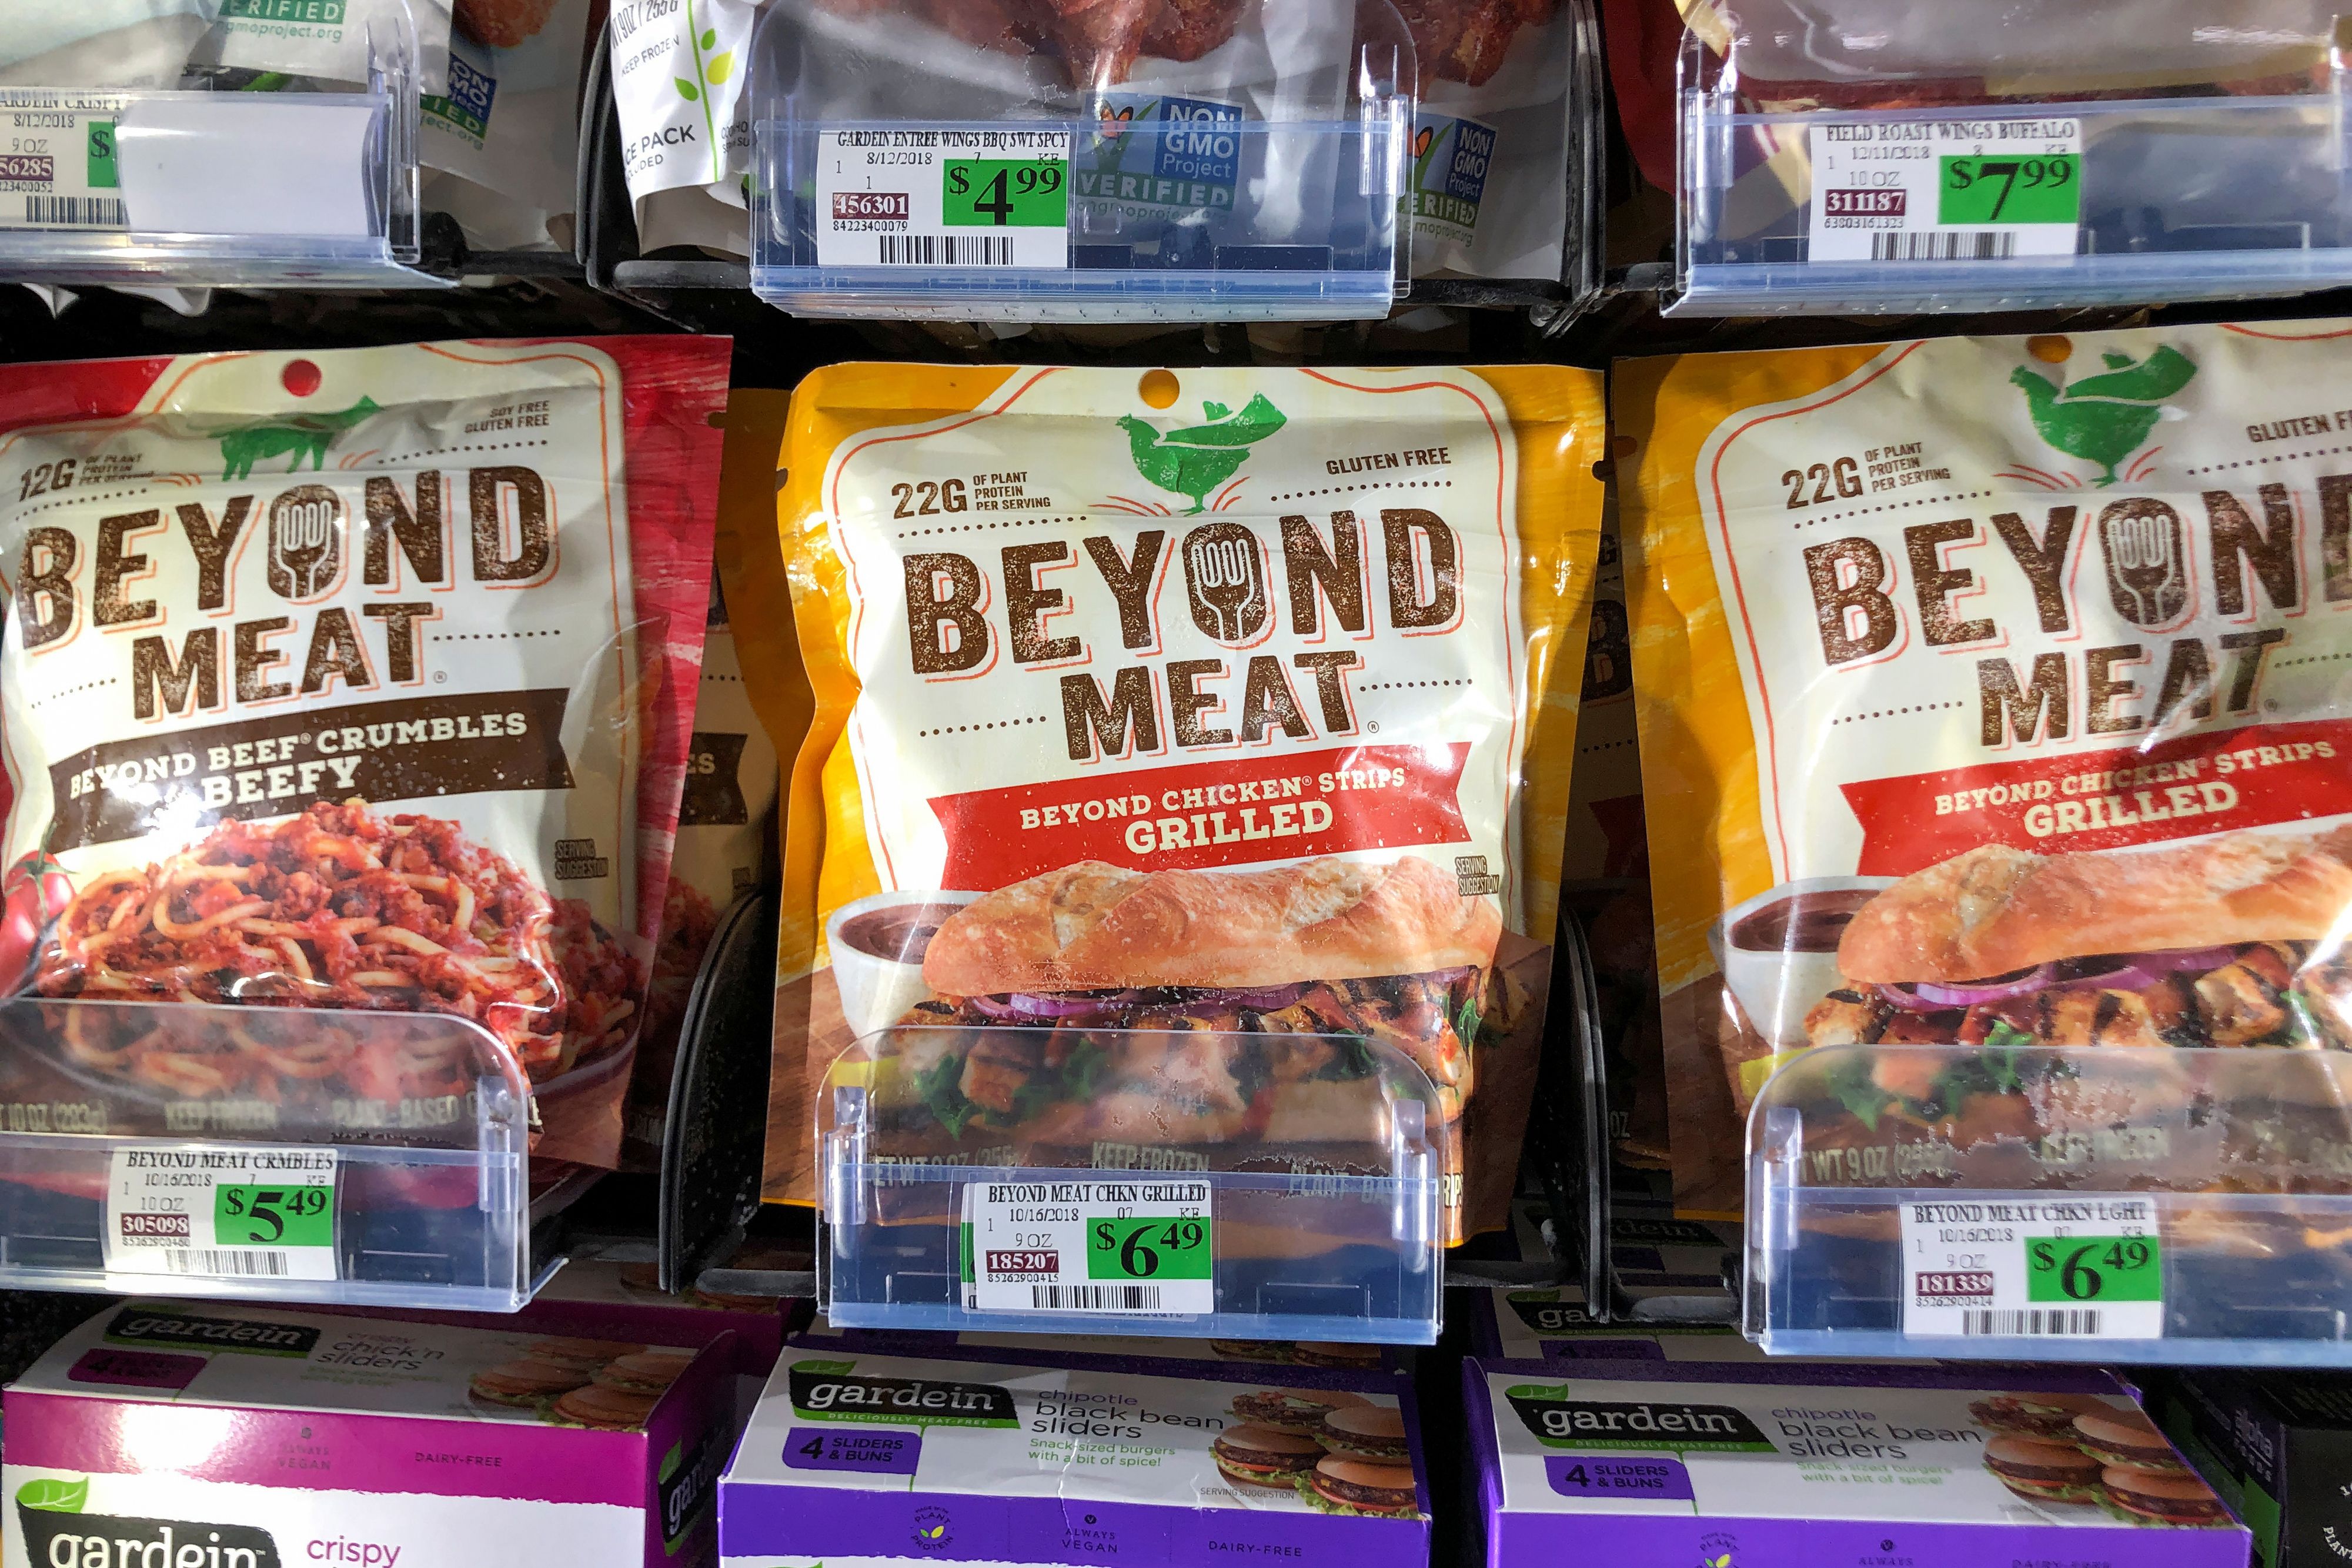 Products from Beyond Meat, the vegan burger maker, are shown for sale at a market in Encinitas, California, June 5, 2019.